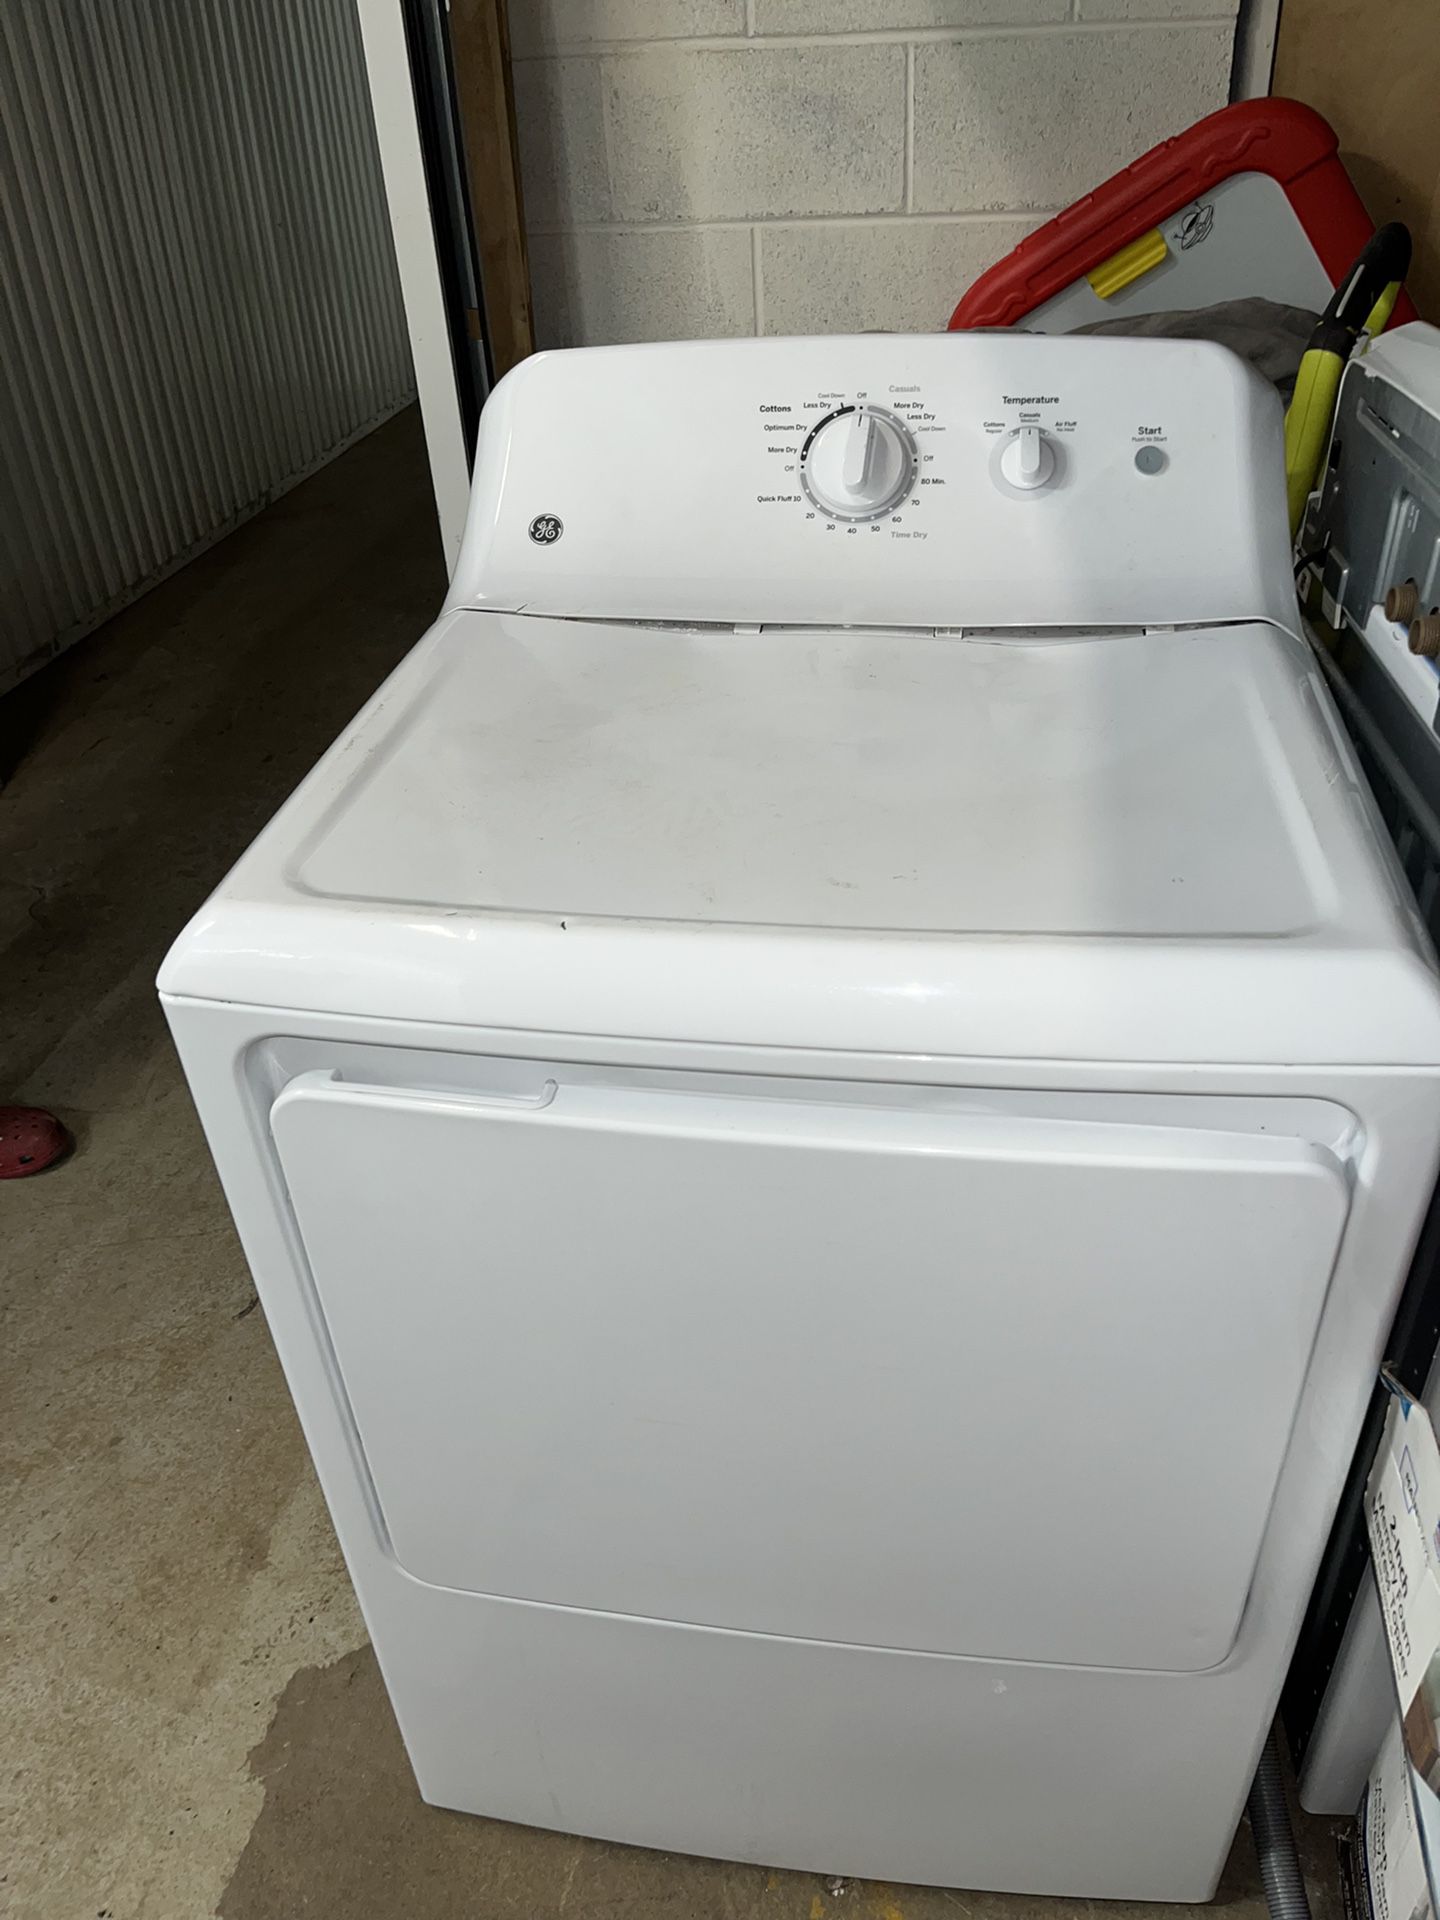 GE Washer And Dryer Set $600 OBH